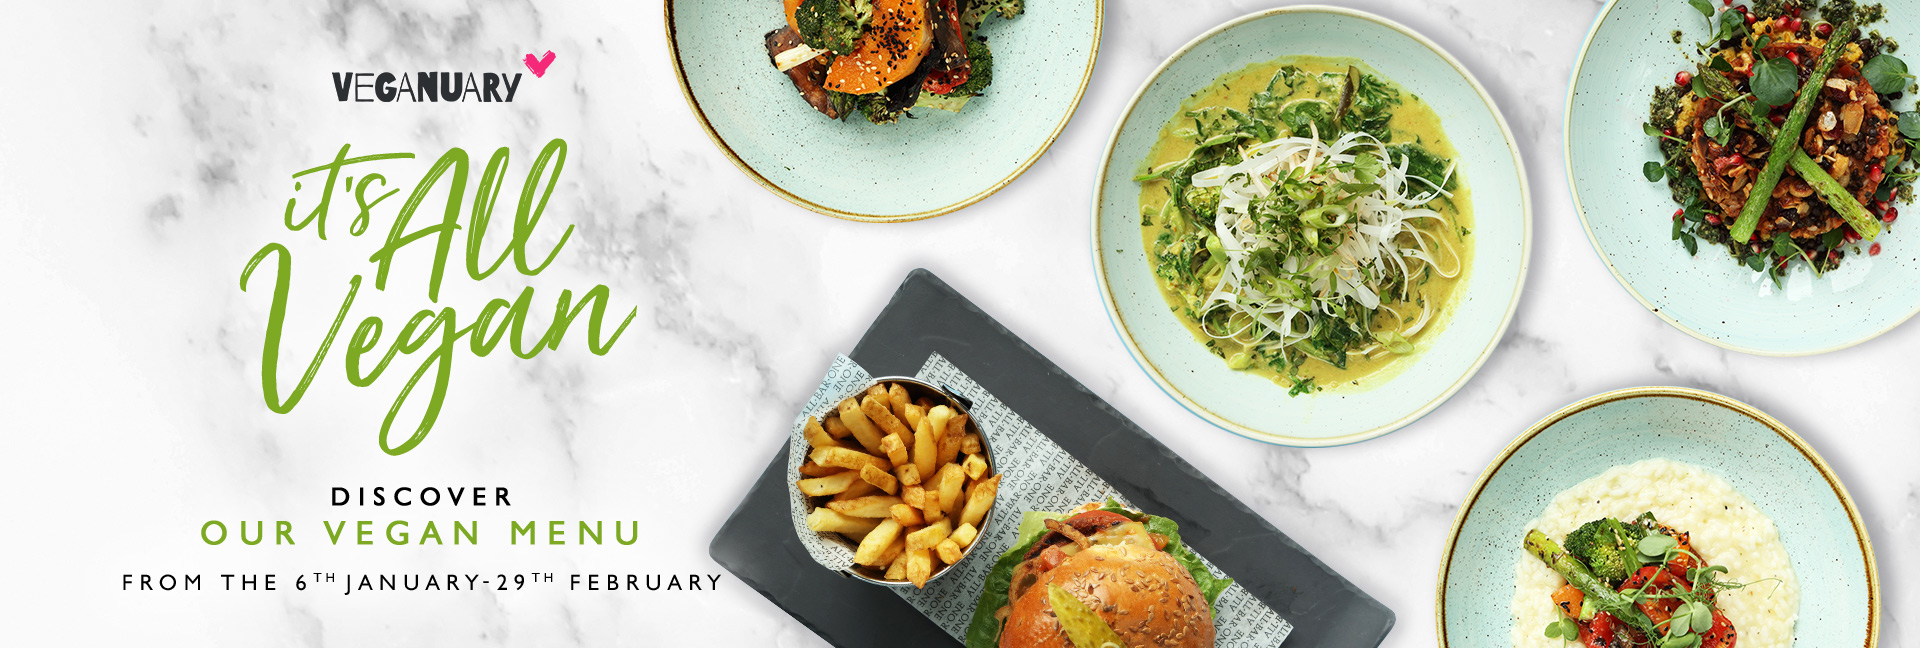 Veganuary Menu at All Bar One Cannon Street